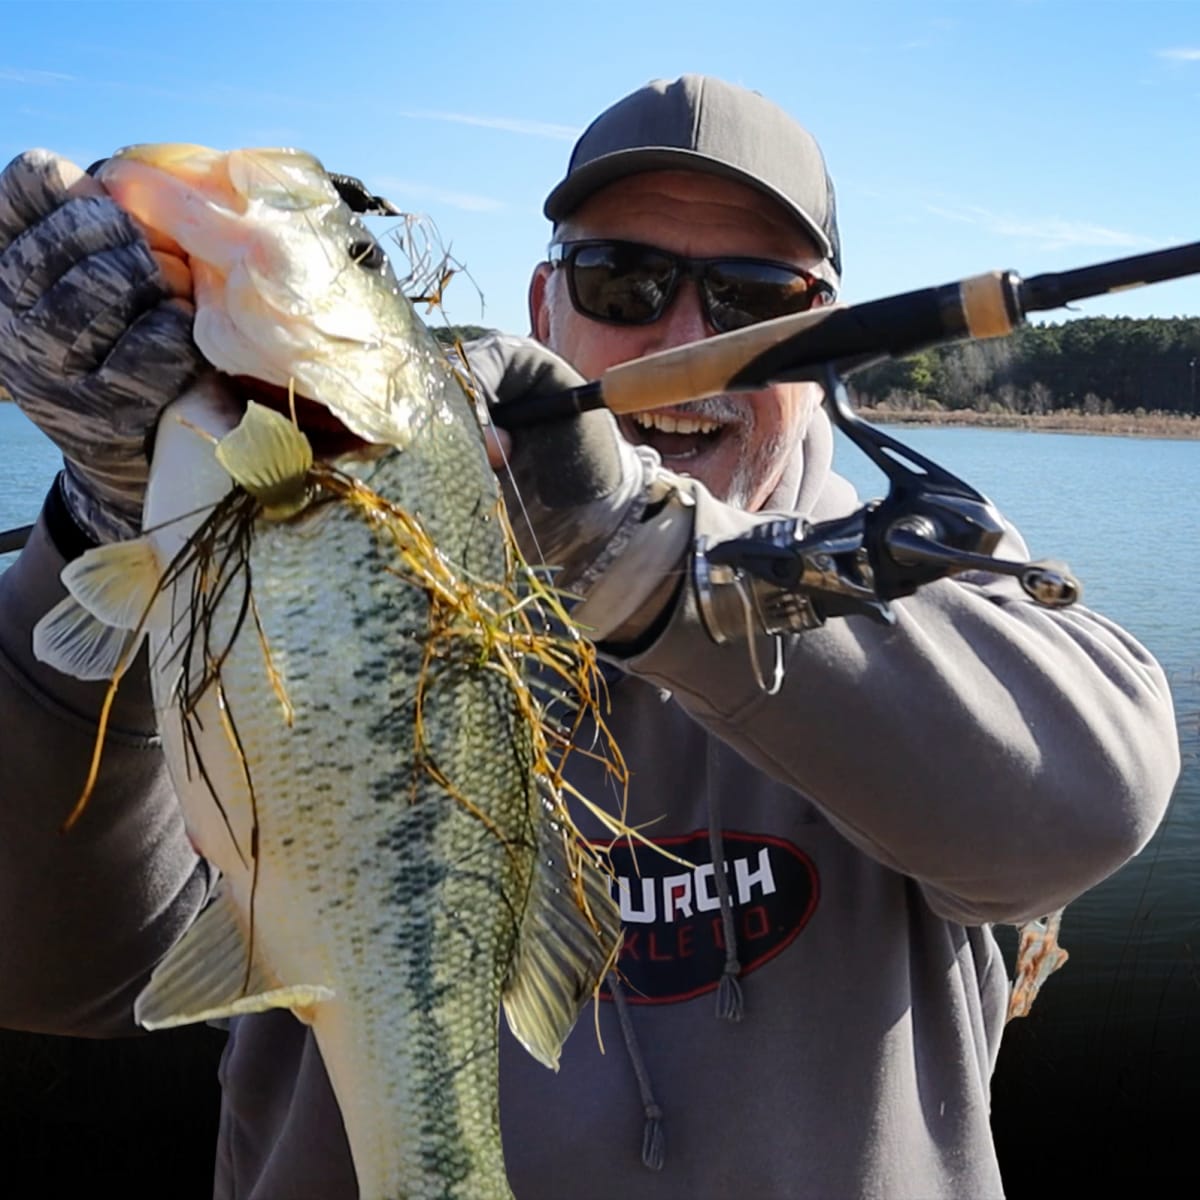 Best Bass Fishing Gear Hack: Get More Without Paying More